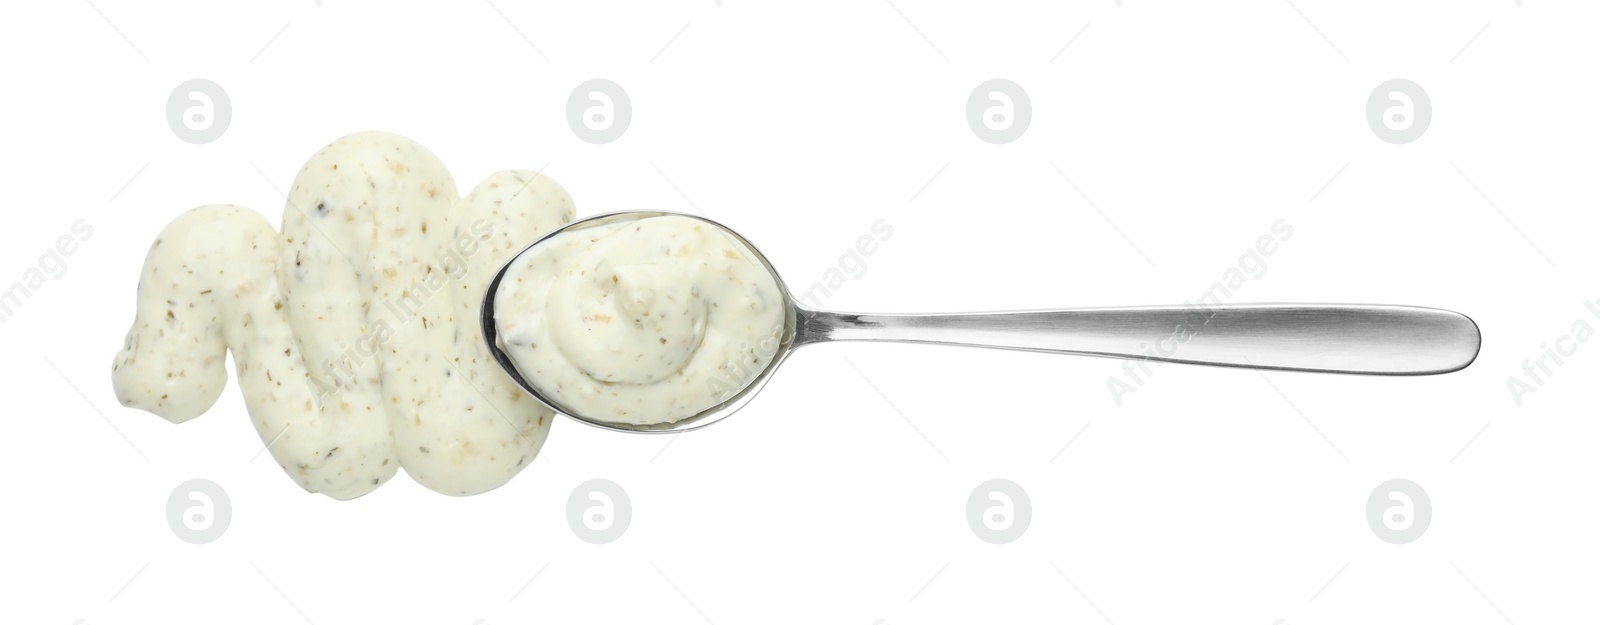 Photo of Tasty tartar sauce and spoon isolated on white, top view